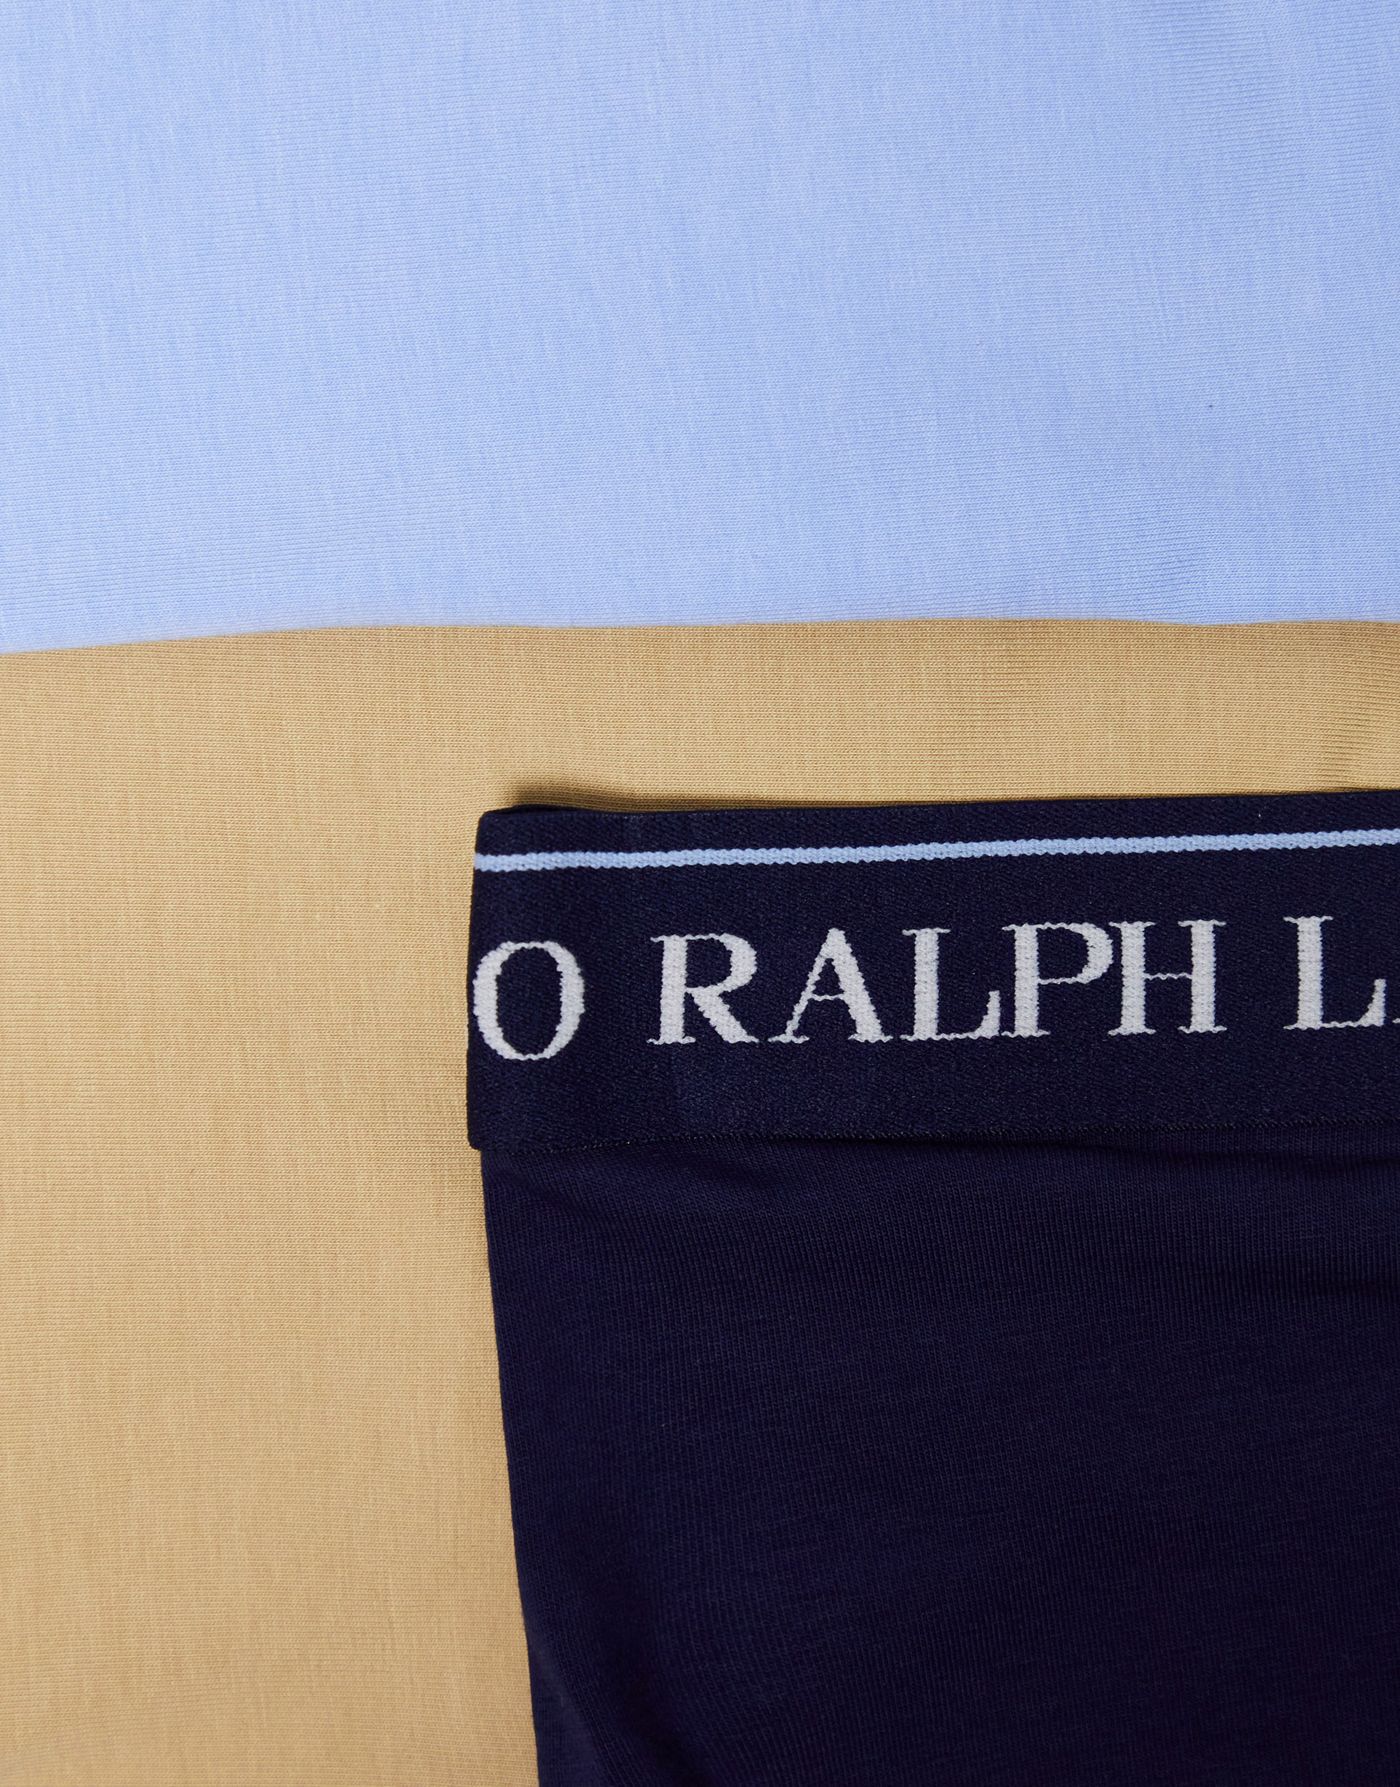 Polo Ralph Lauren 3 pack trunks in navy tan and blue with logo